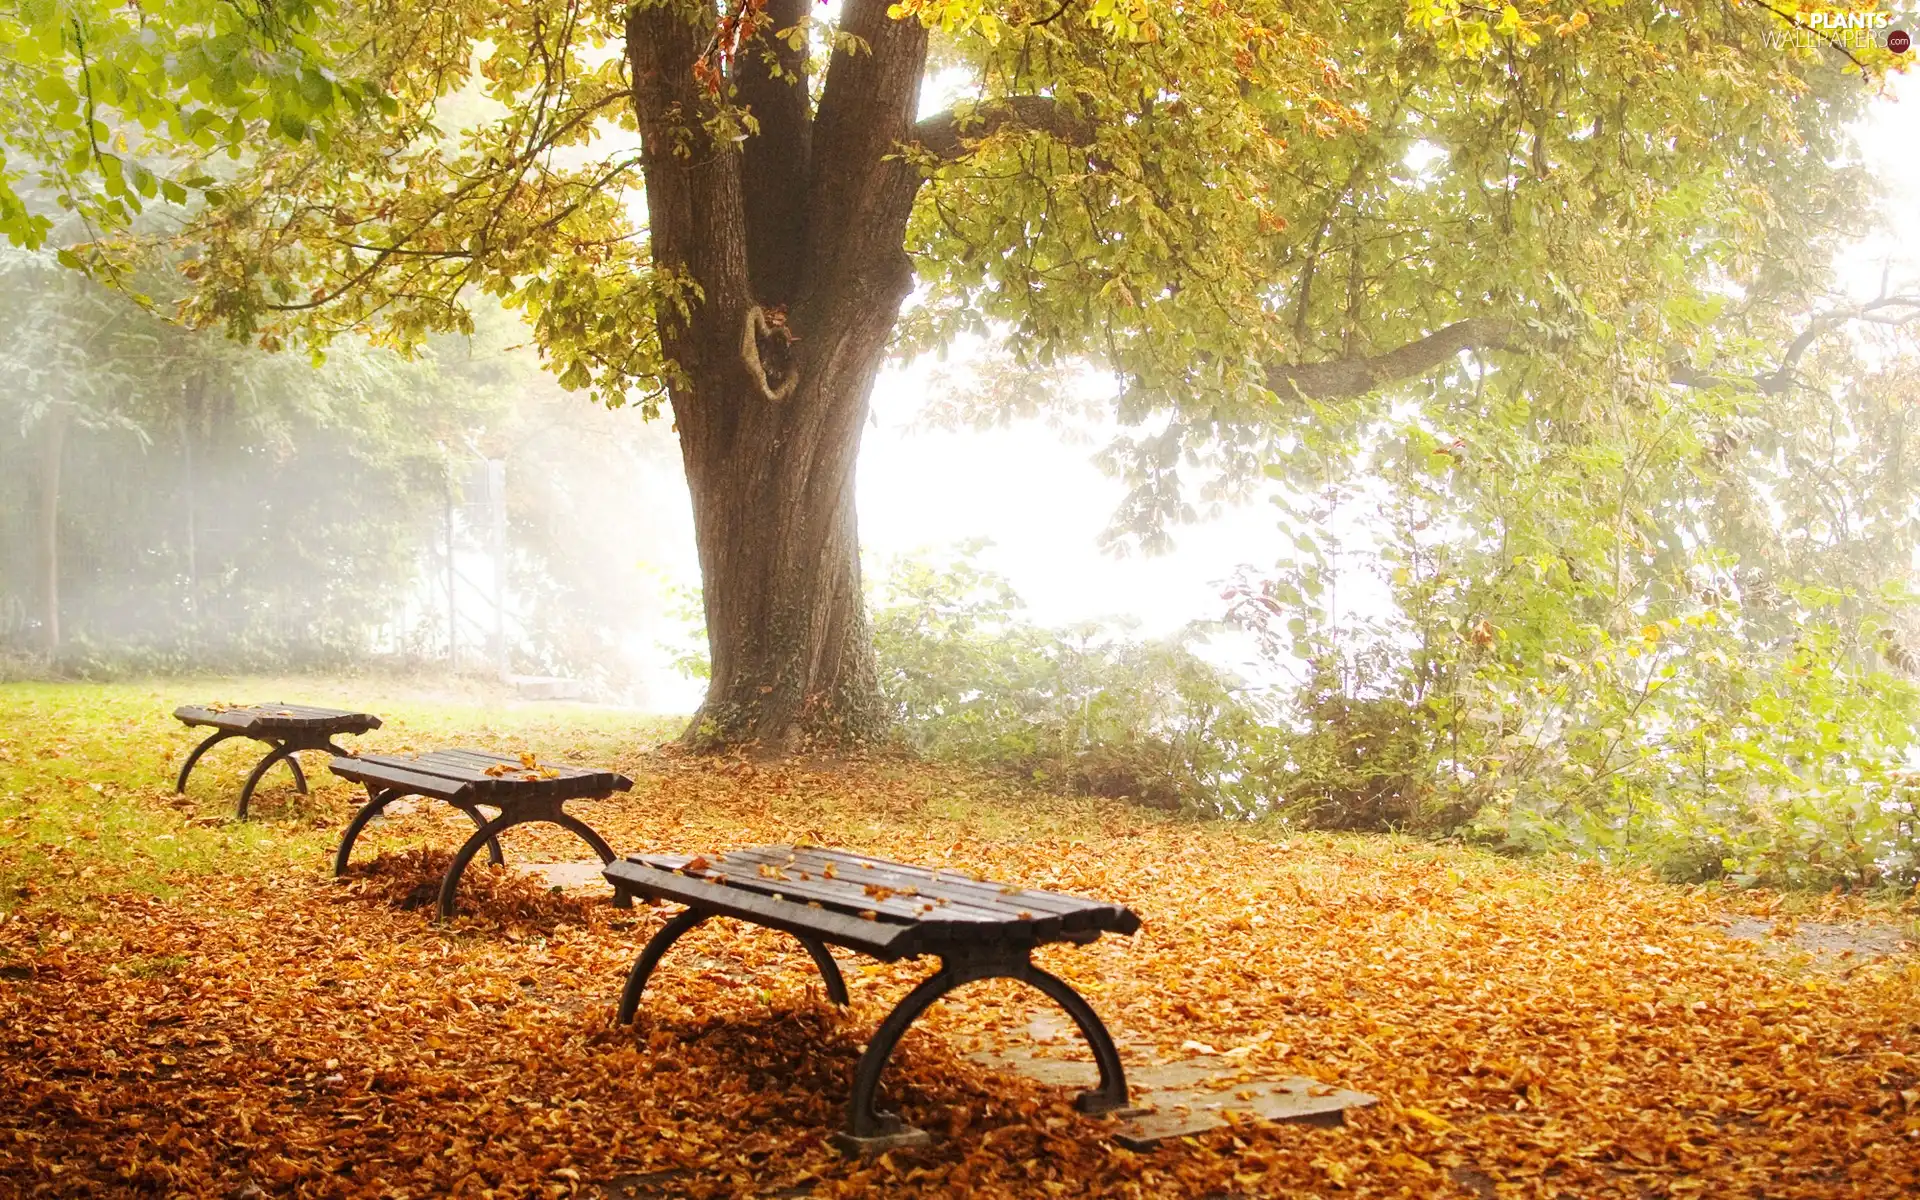 Leaf, autumn, car in the meadow, bench, forest